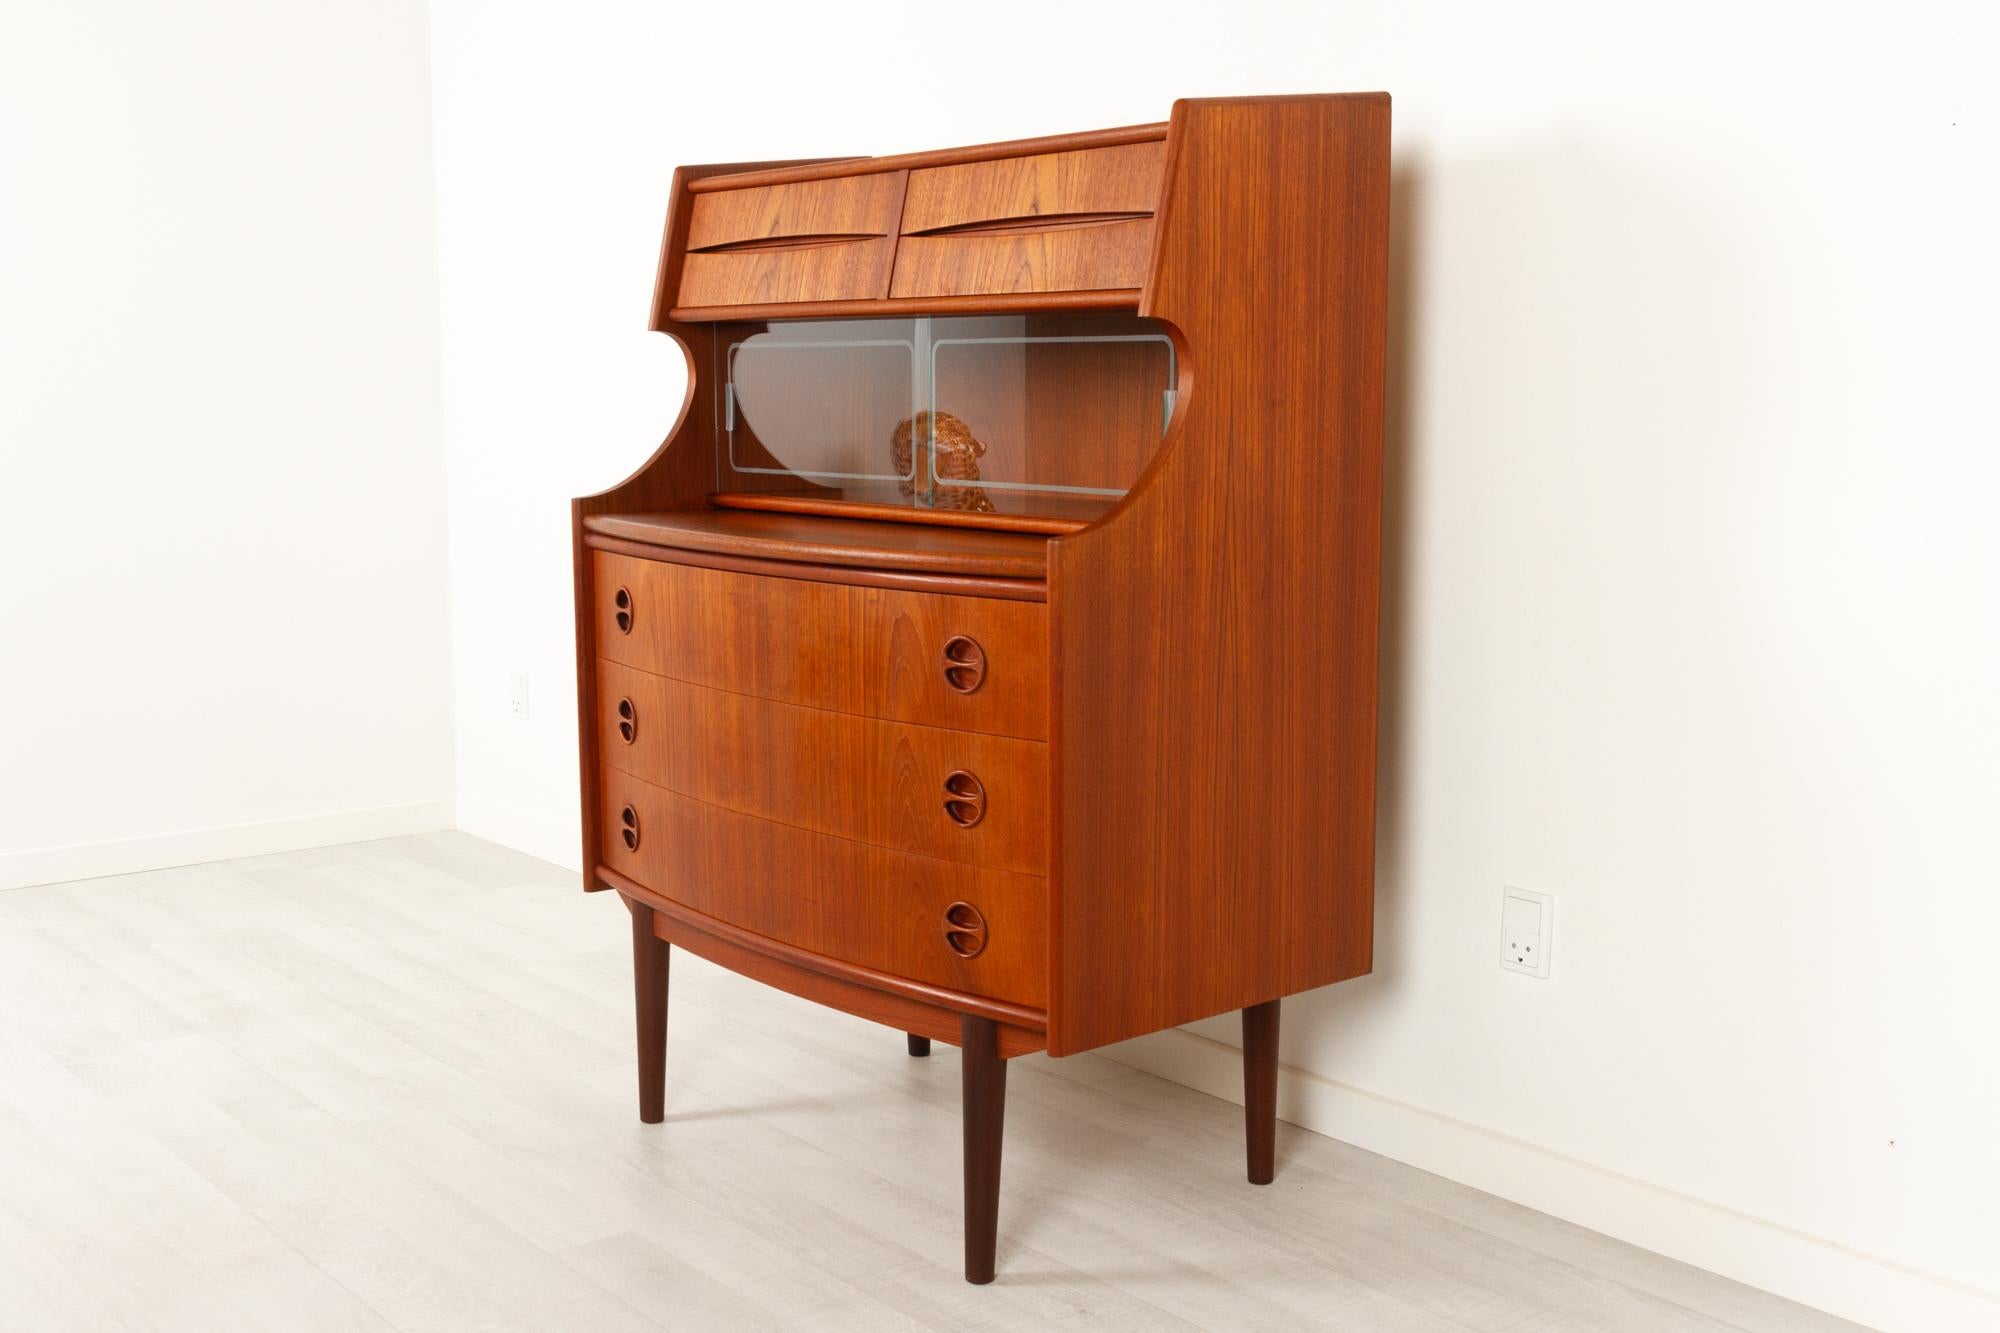 Vintage Danish Teak Secretary Desk 1960s
Mid-century modern Danish secretaire with curved front. Very elegant and versatile, both a writing desk and a chest of drawers. Unknown manufacturer but often attributed to Arne Vodder or Falsig